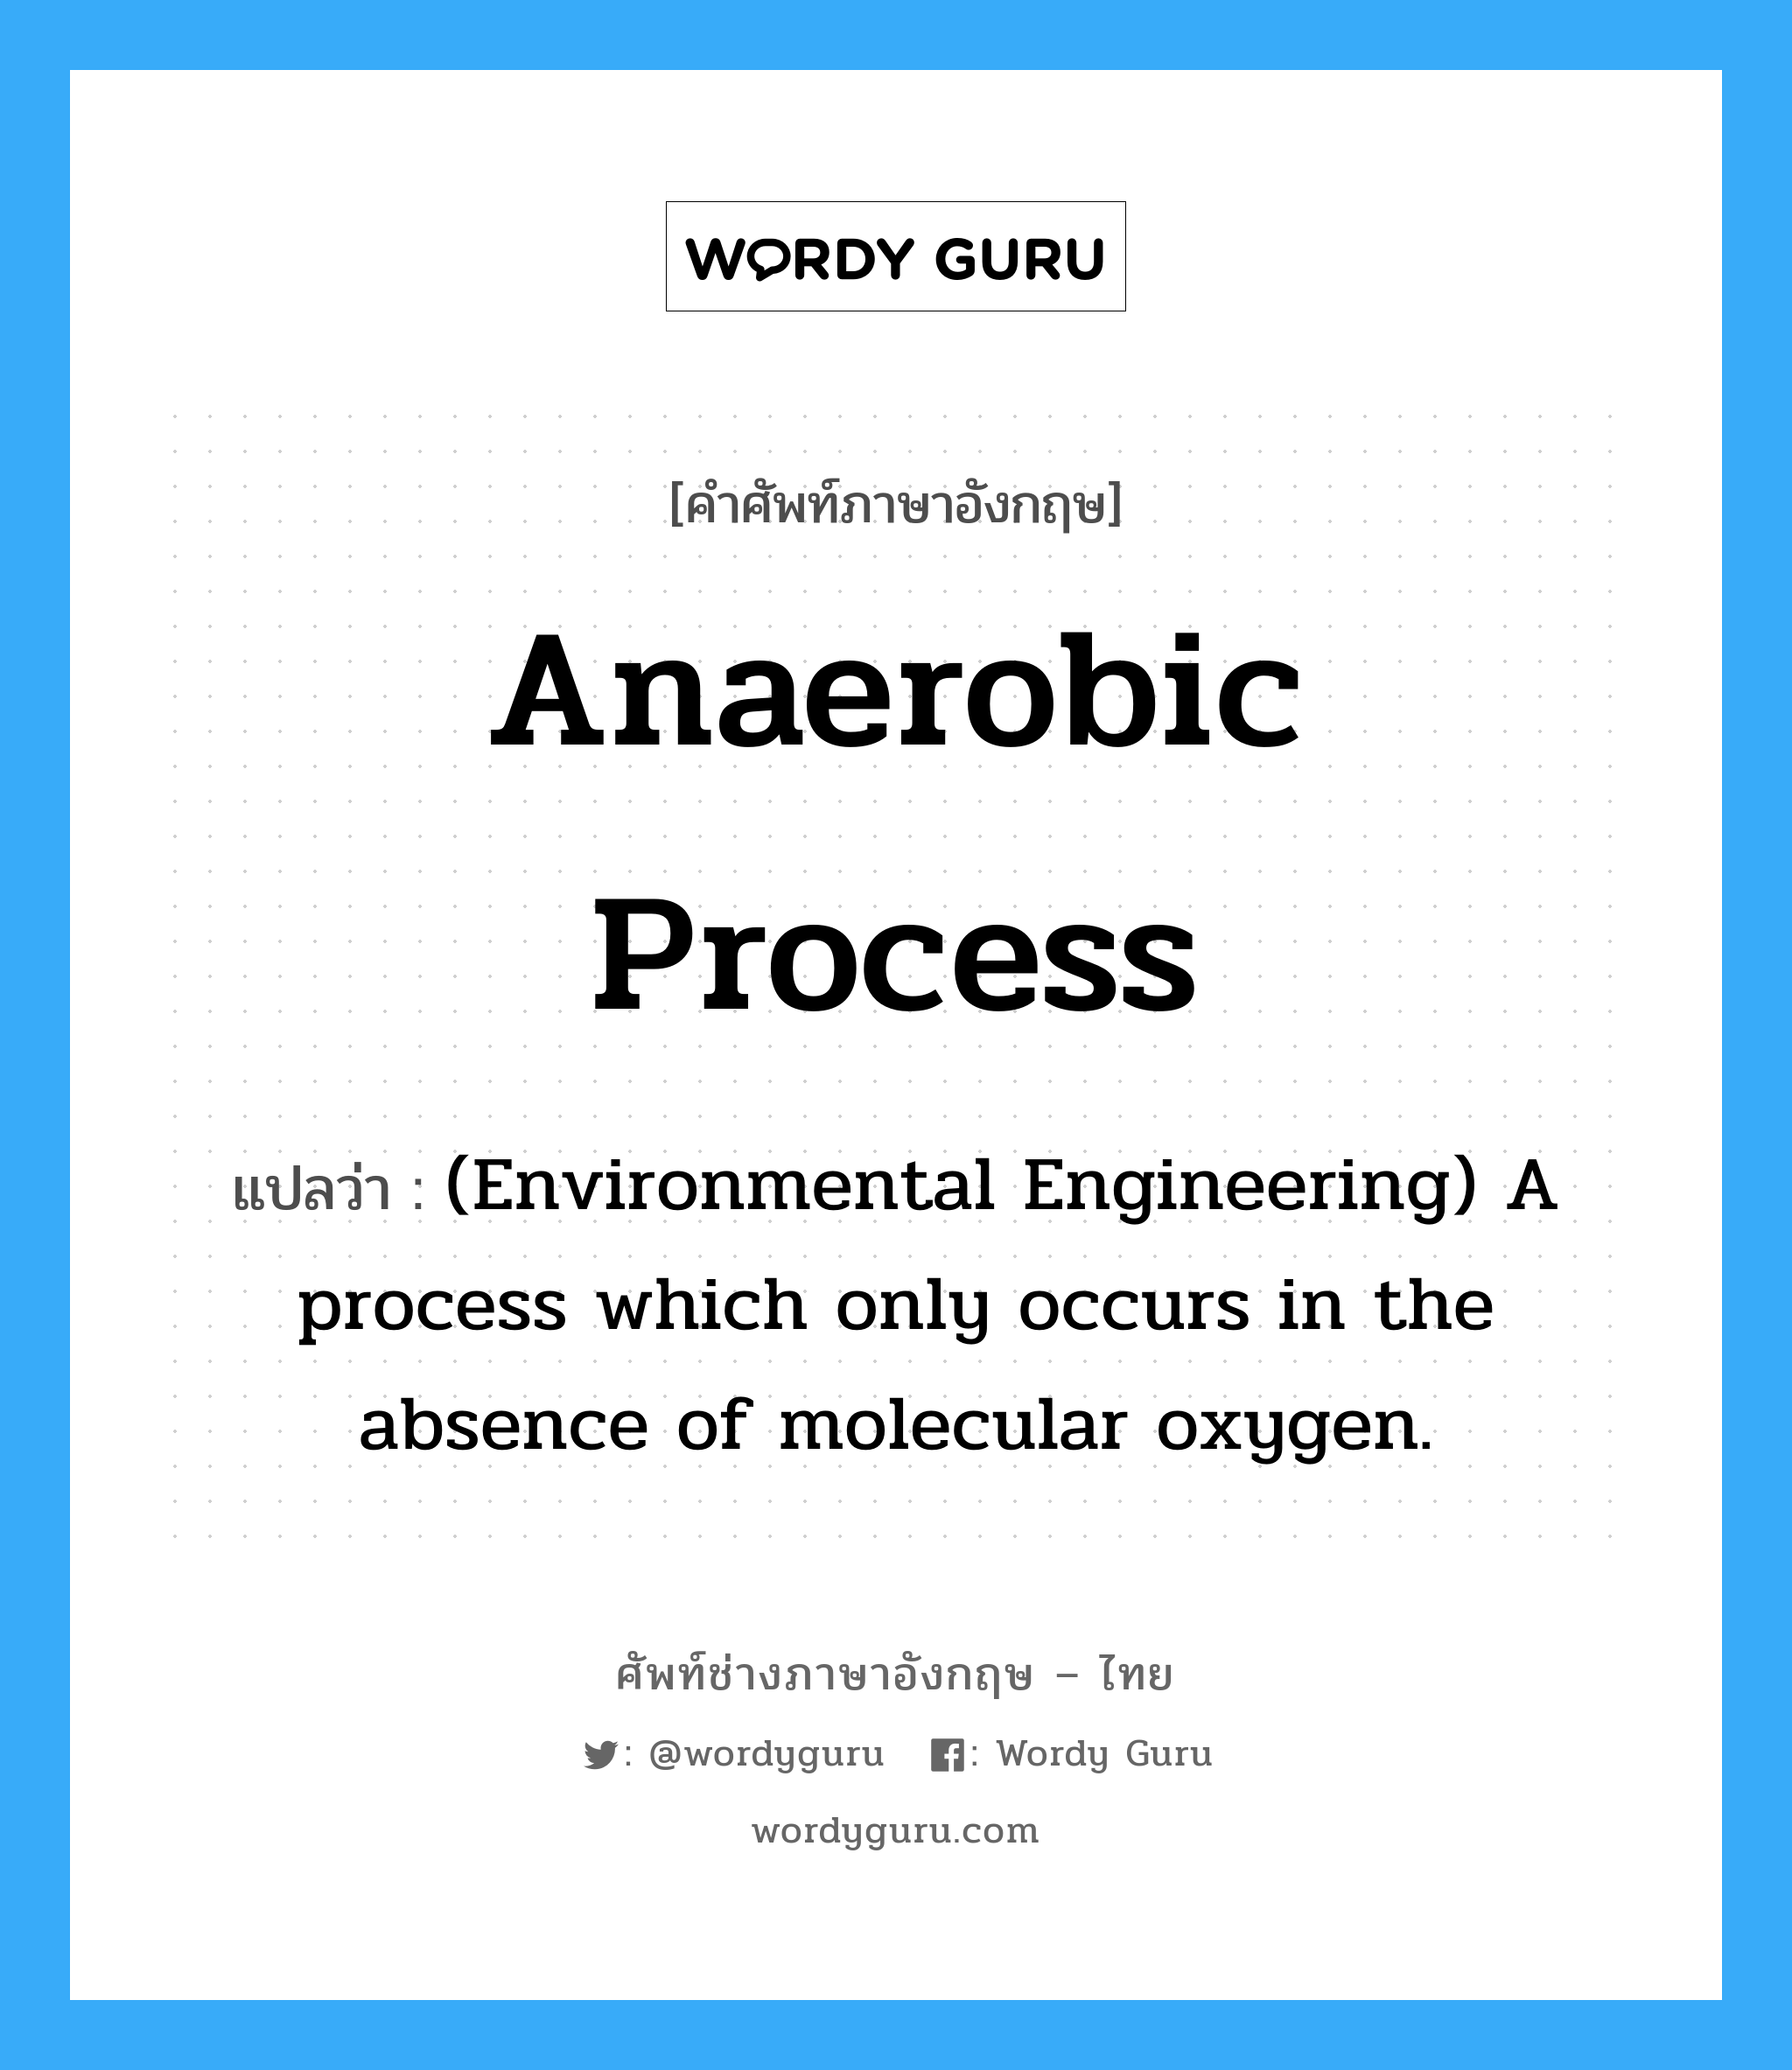 Anaerobic process แปลว่า?, คำศัพท์ช่างภาษาอังกฤษ - ไทย Anaerobic process คำศัพท์ภาษาอังกฤษ Anaerobic process แปลว่า (Environmental Engineering) A process which only occurs in the absence of molecular oxygen.